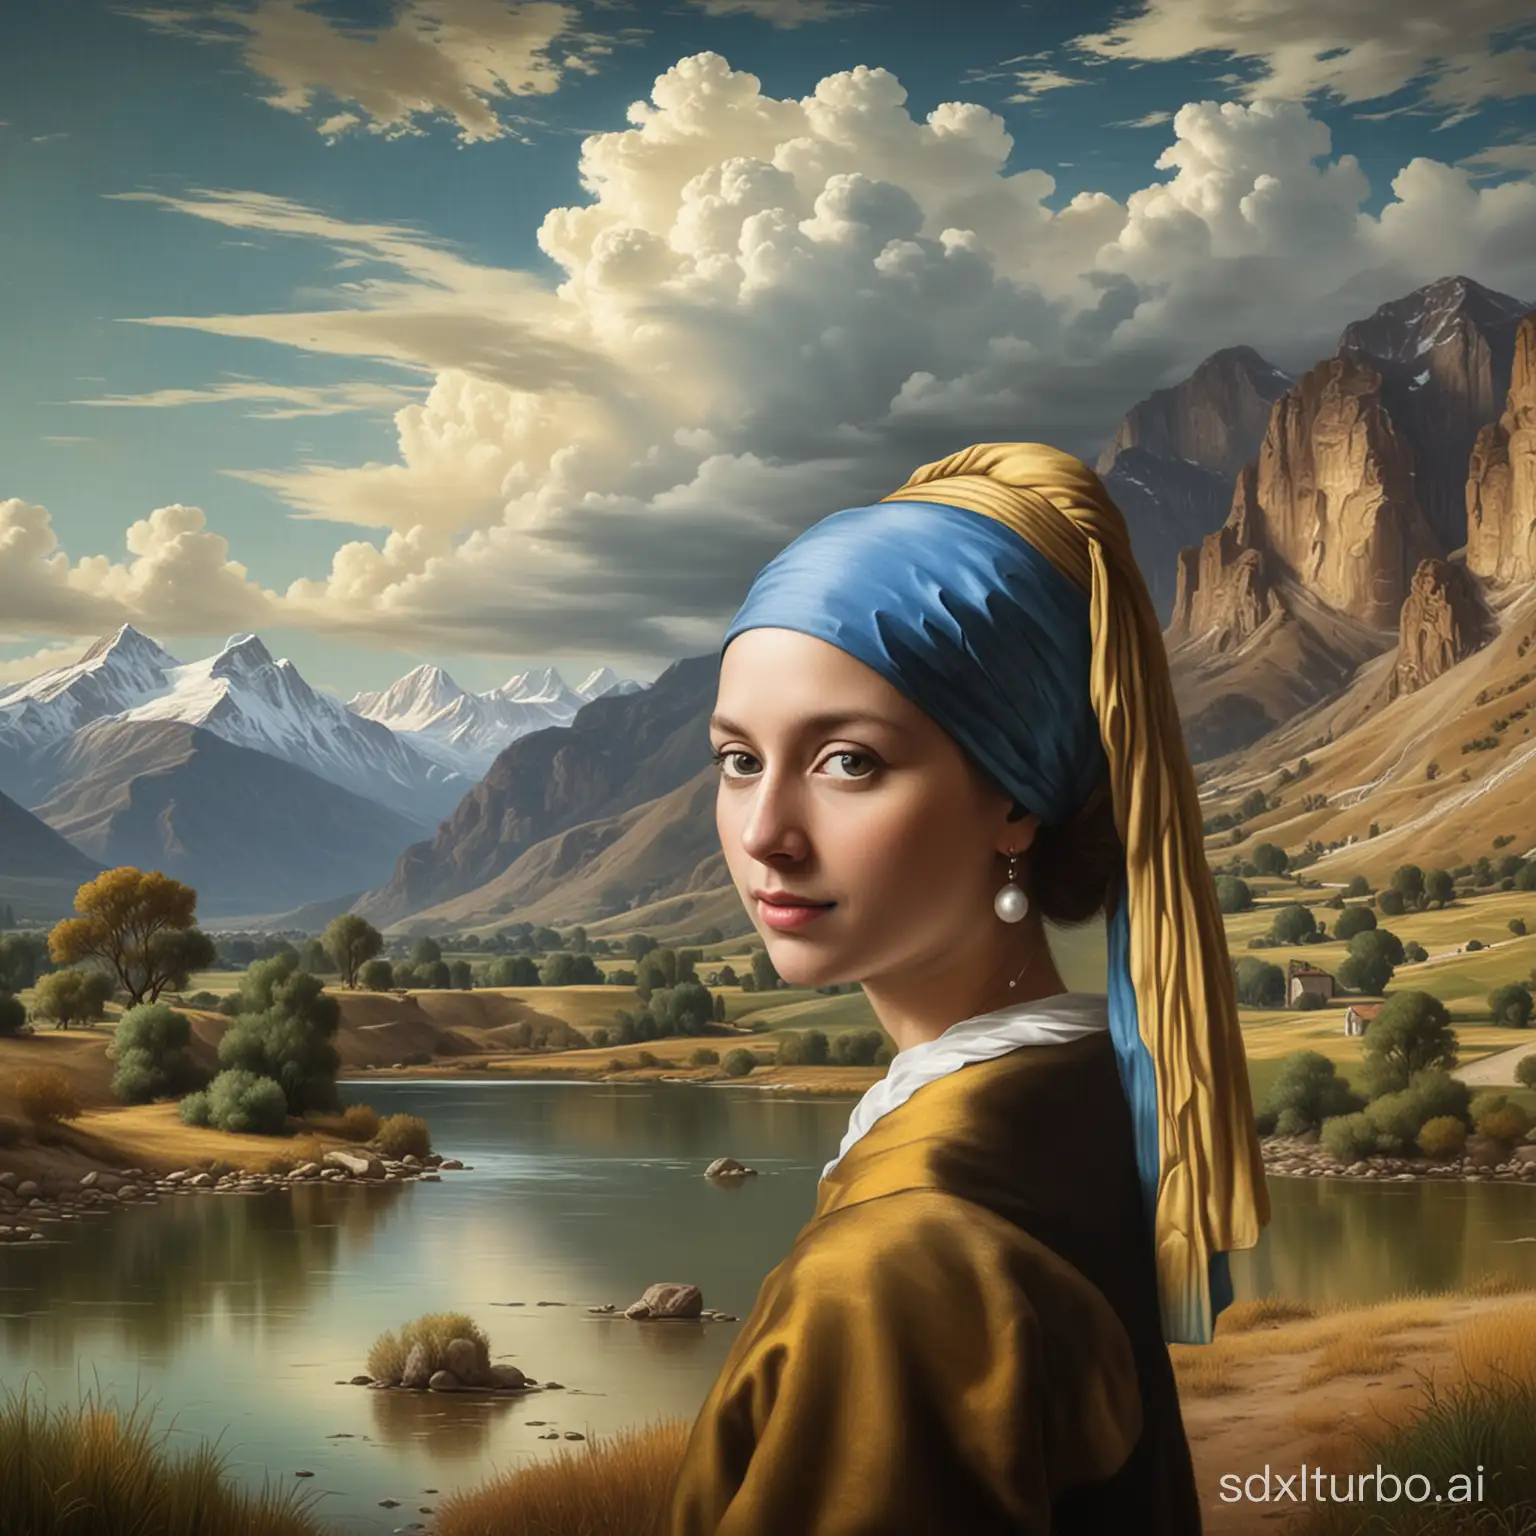 monna lisa, girl with the pearl earring, background creek, mountains and clouds